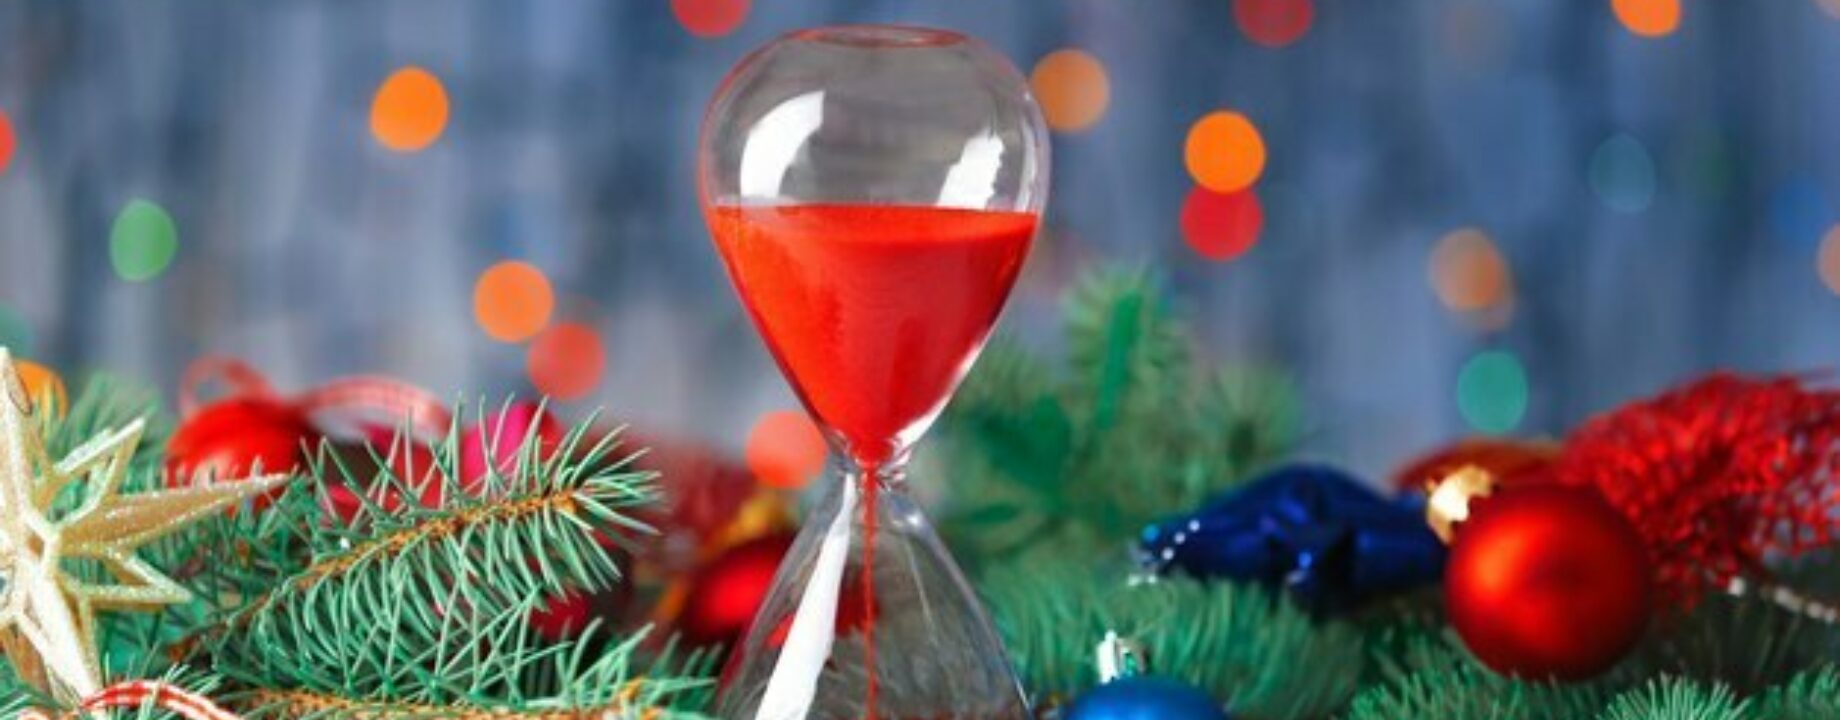 Hourglass fir tree branches against defocused lights christmas countdown concept 392895 55895